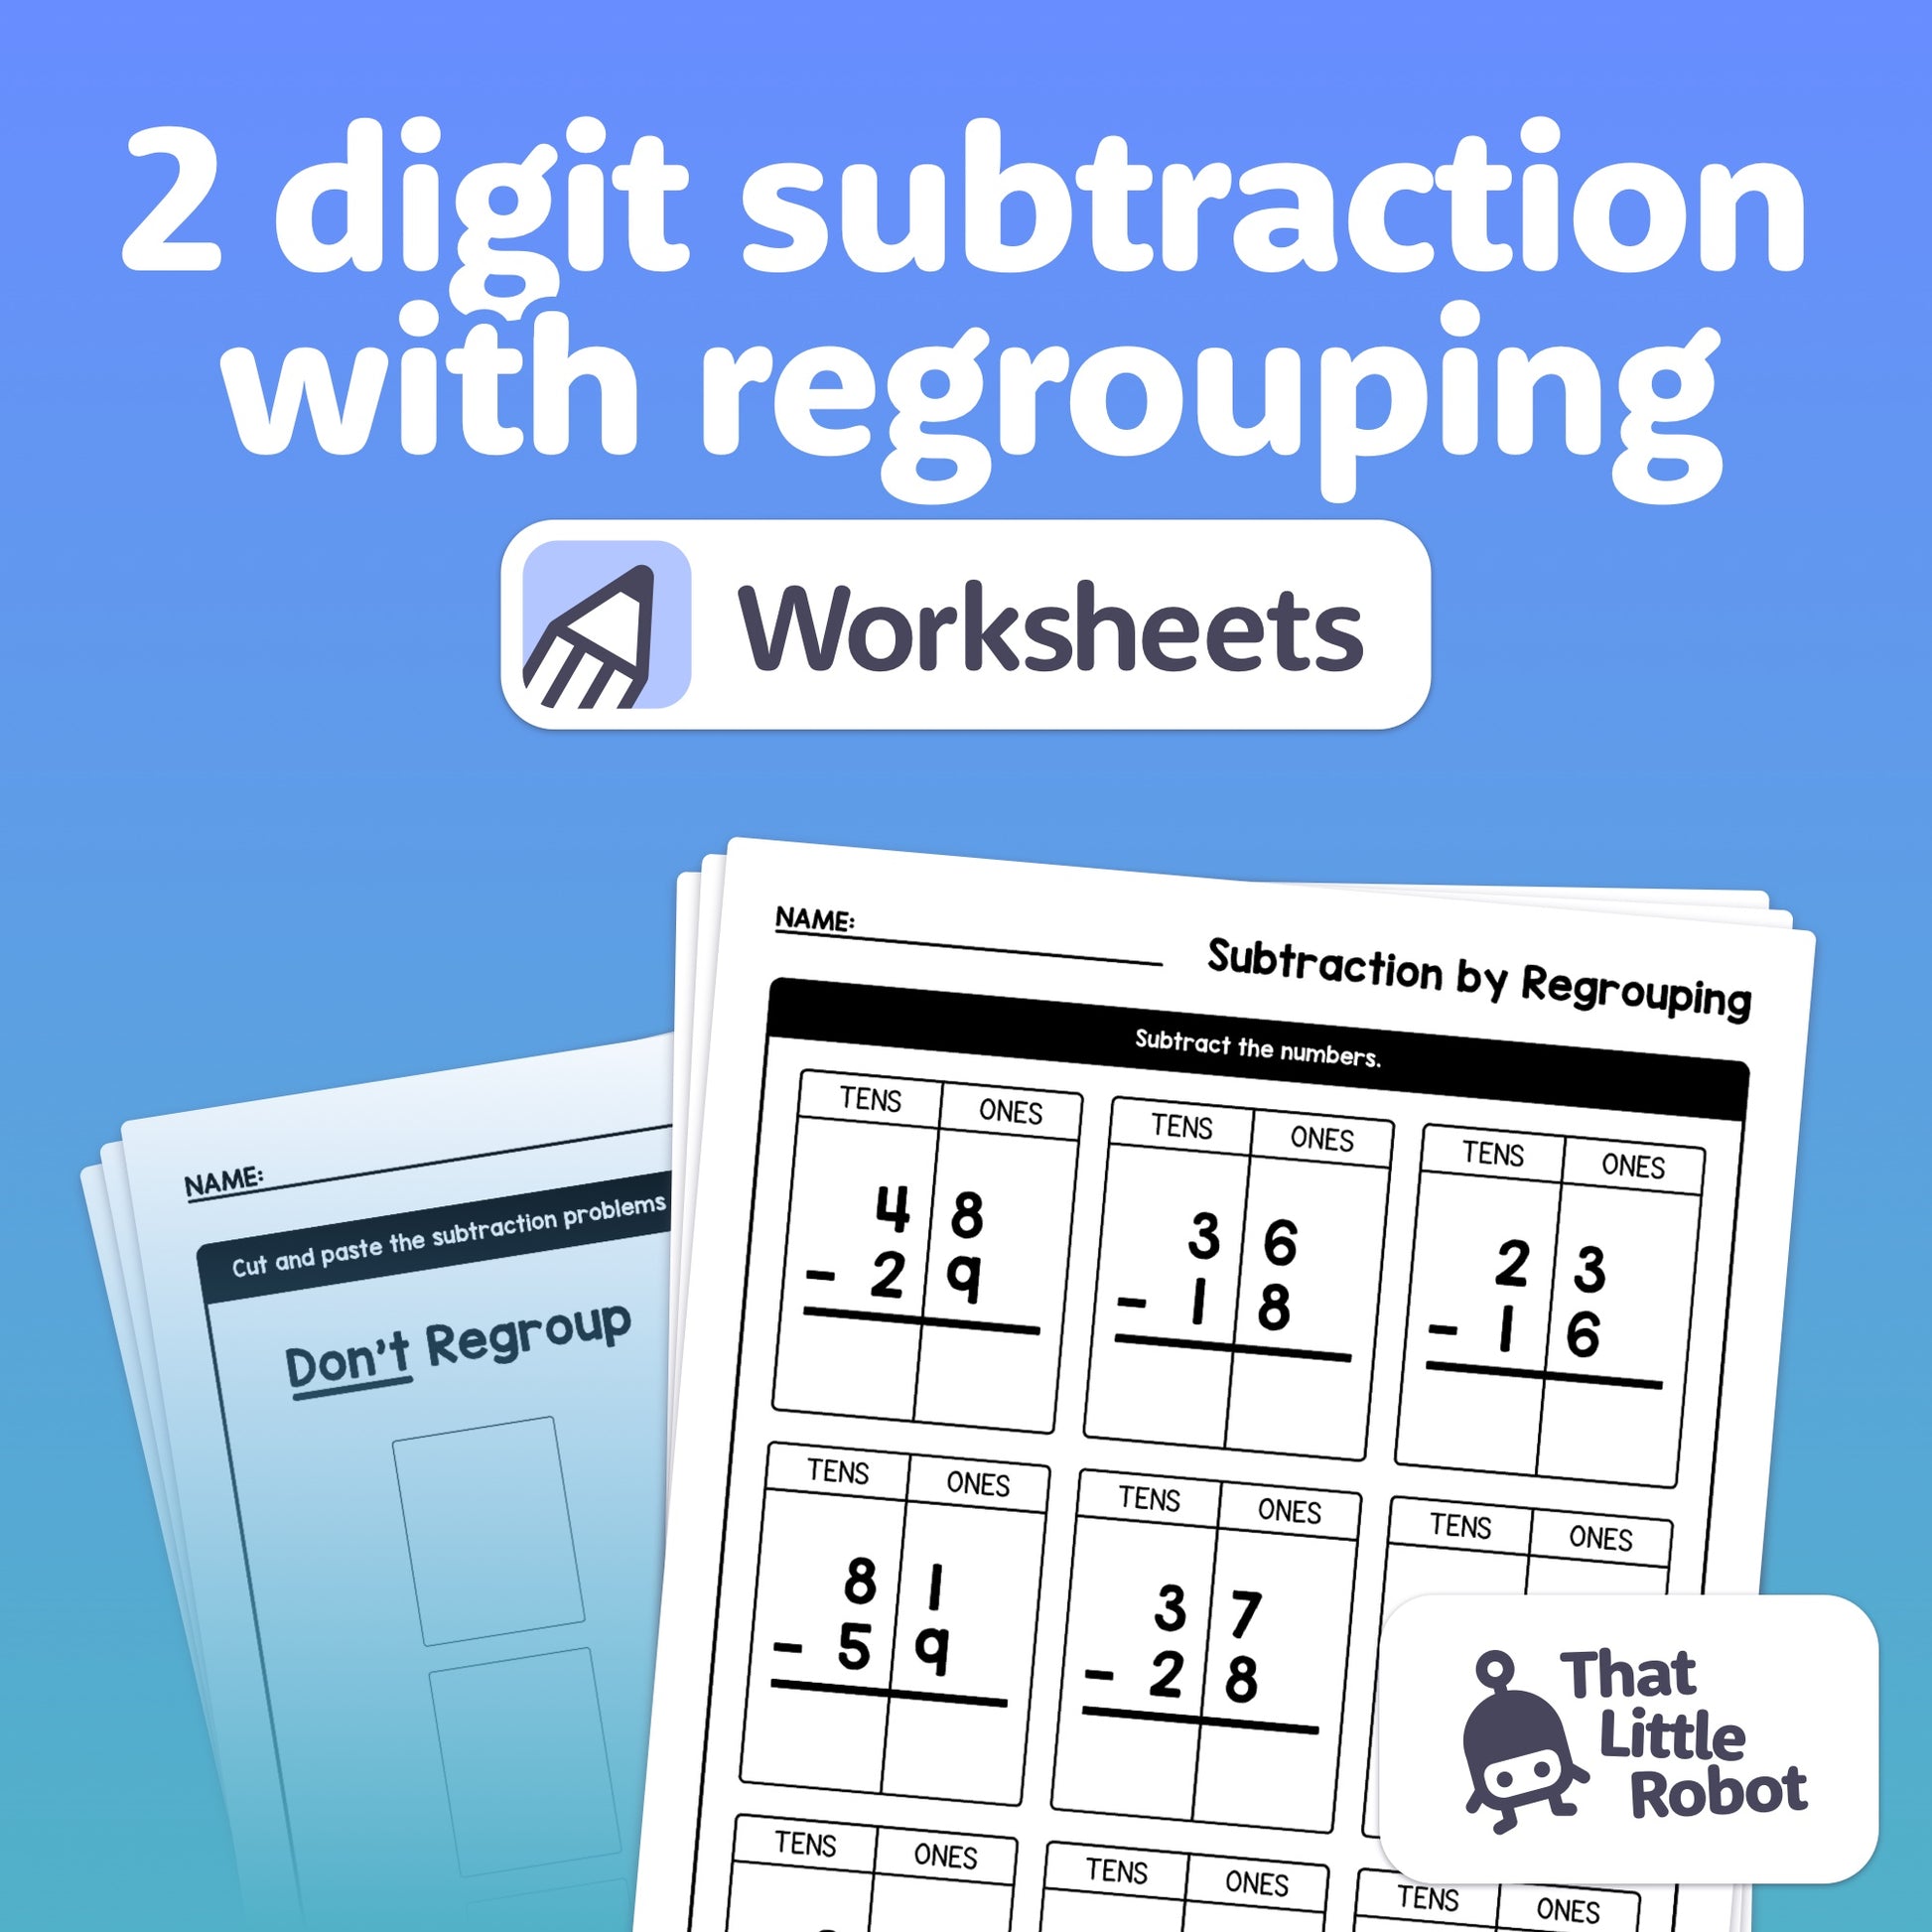 2 digit subtraction with regrouping worksheets